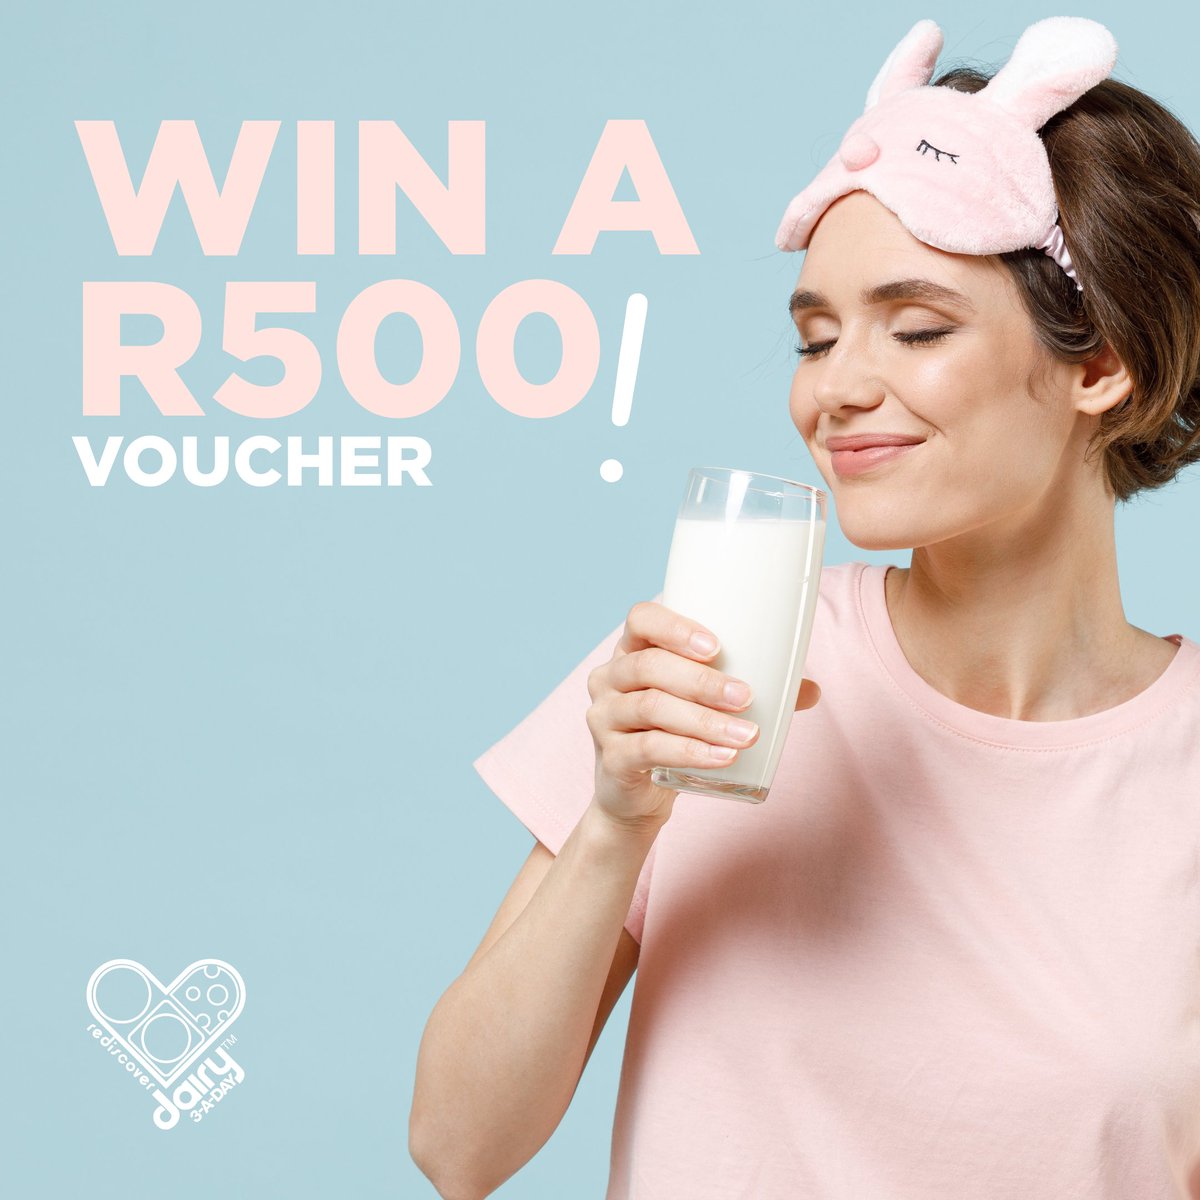 😋 Do you stan dairy? Well… You could WIN a R500 voucher. Comment which dairy product gives you go and tag a friend to enter too. 
 
 #DairyGivesYouGo #EnjoyDairy